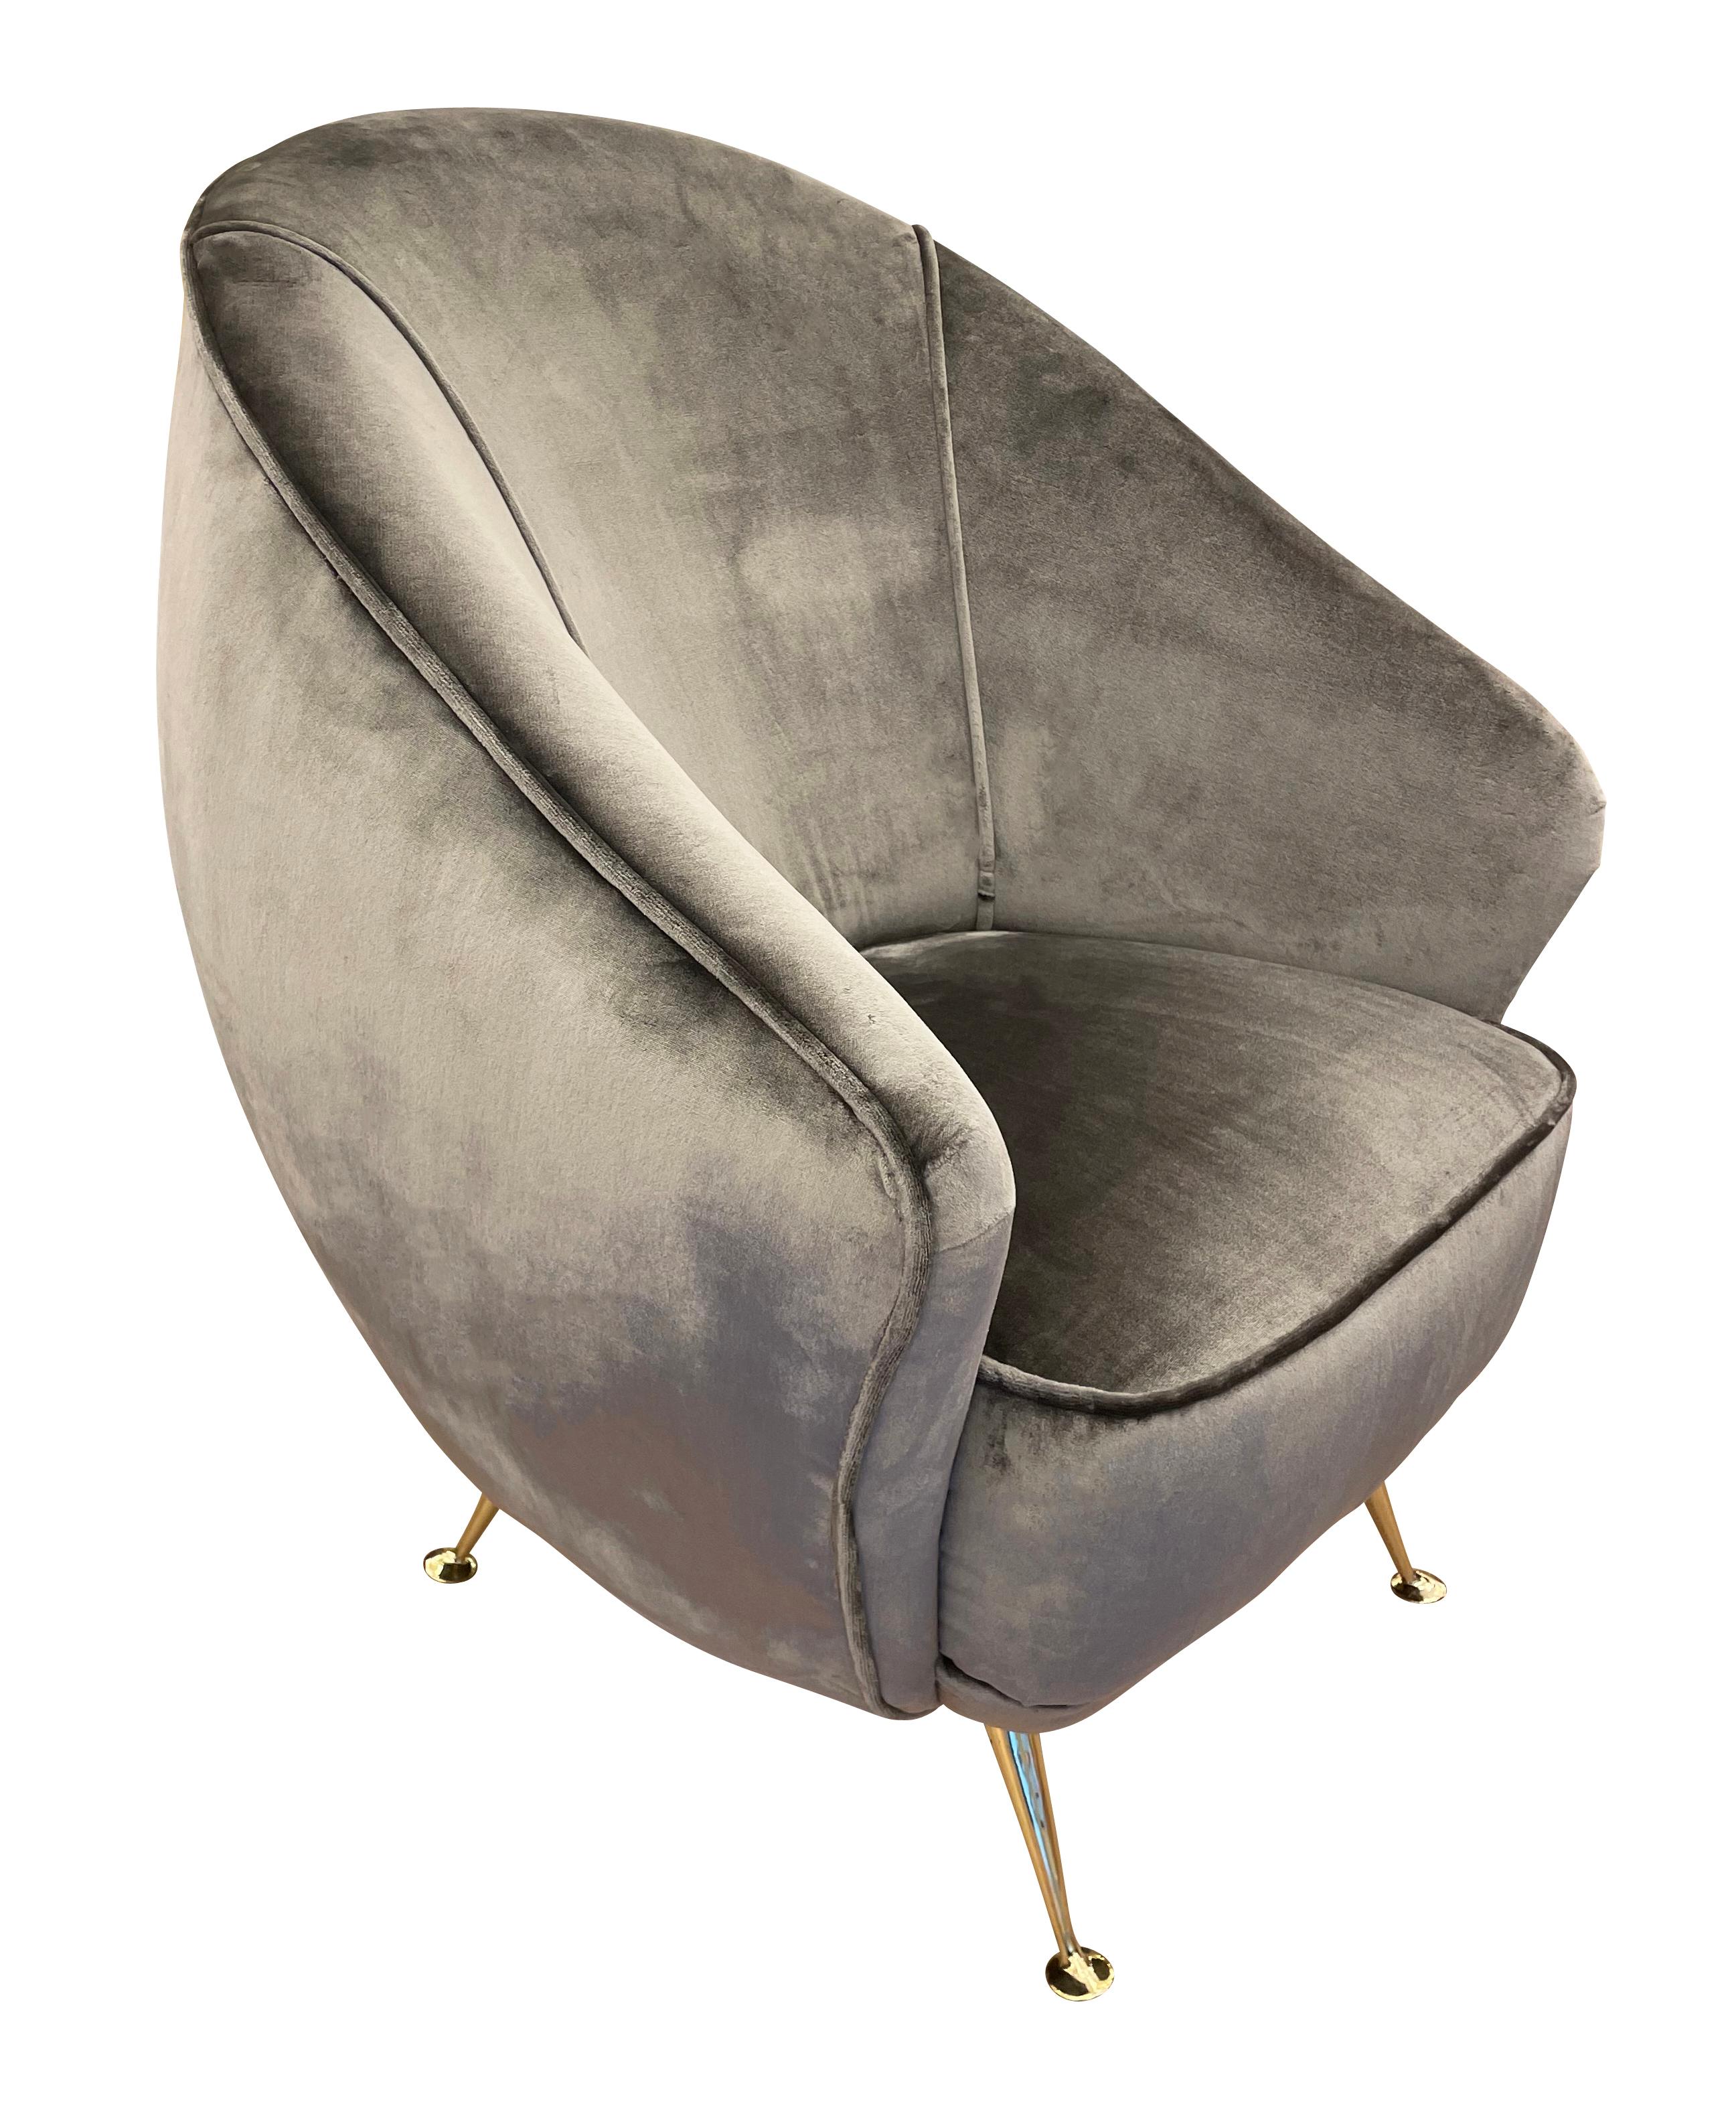 Pair of egg shaped Italian mid-century lounge chairs with brass feet. The fabric is a gray velvet. Pair can be split on request.

Condition: Excellent vintage condition, minor wear to the fabric.

Measures: Width: 29”

Depth: 29”

Height: